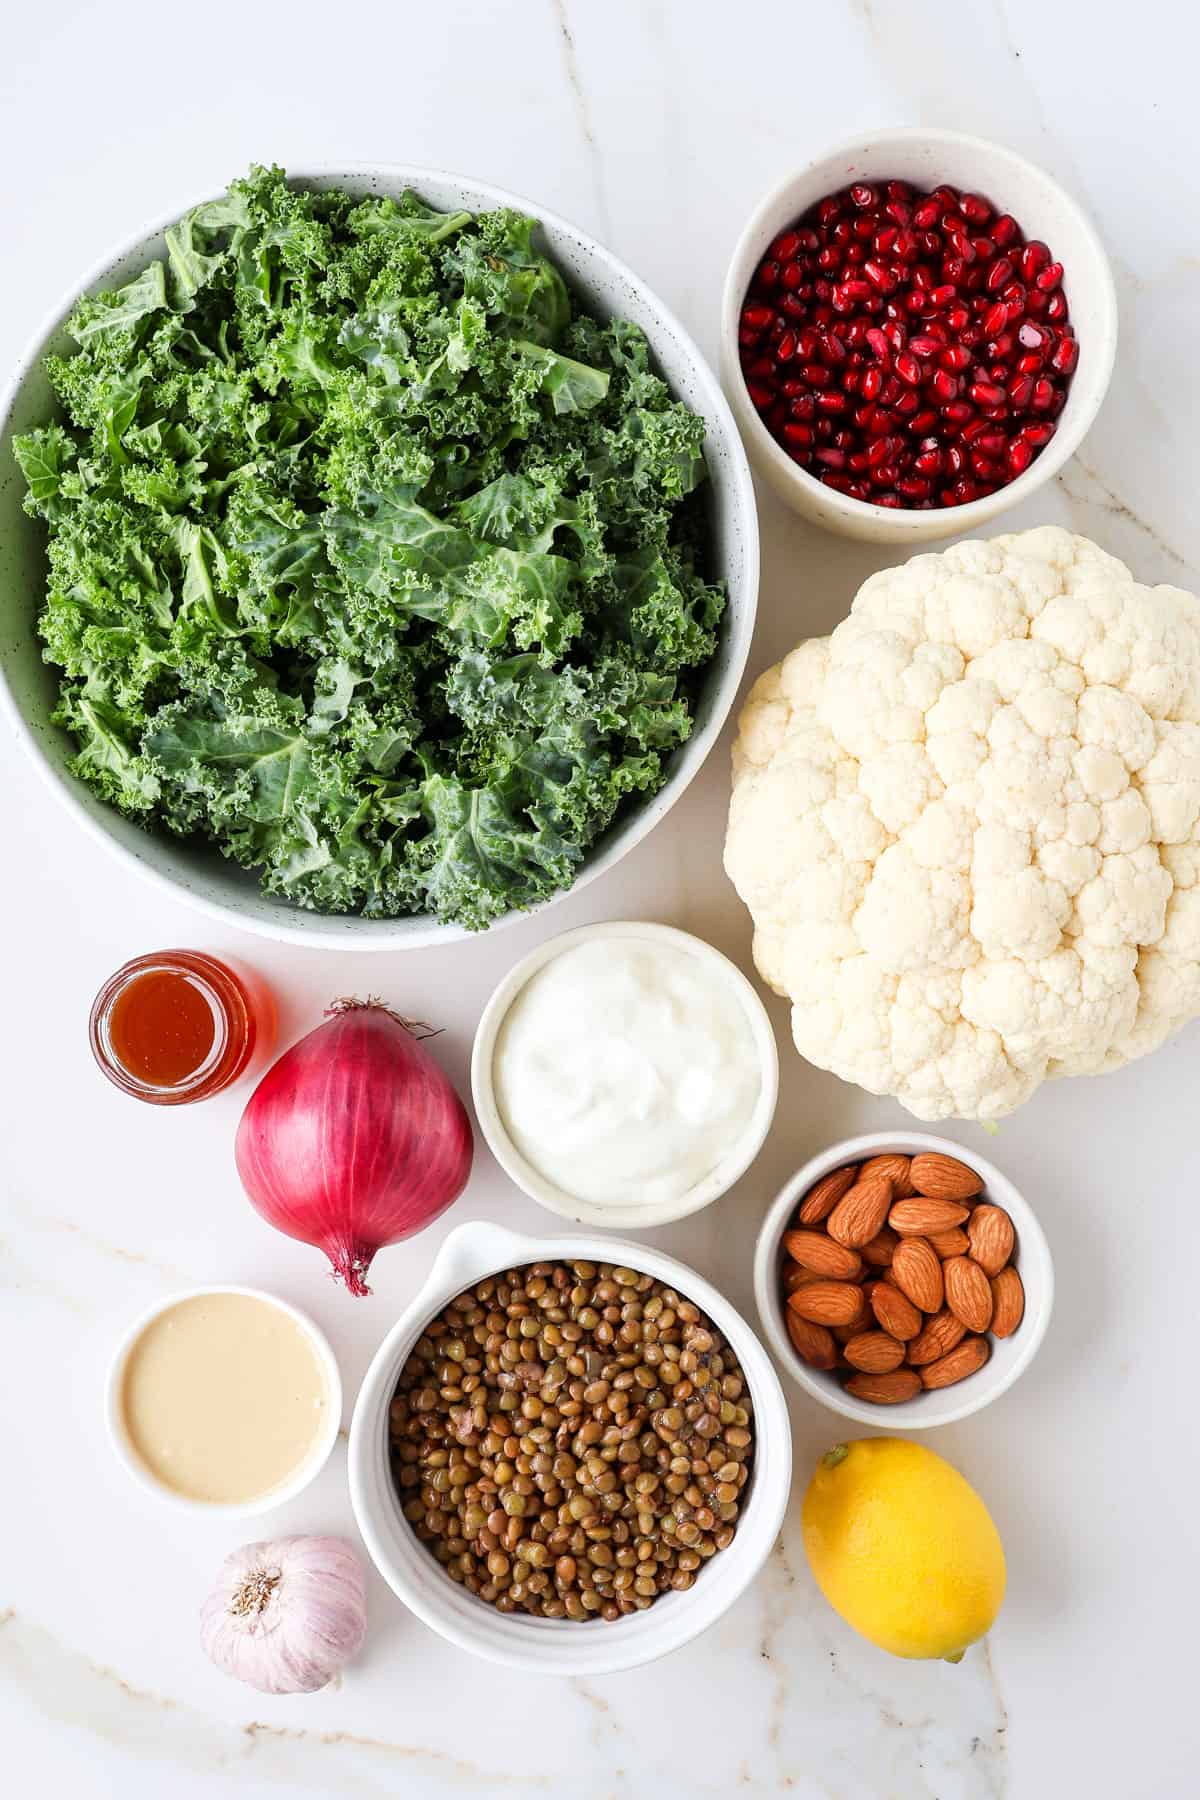 Ingredients shown to make the salad.